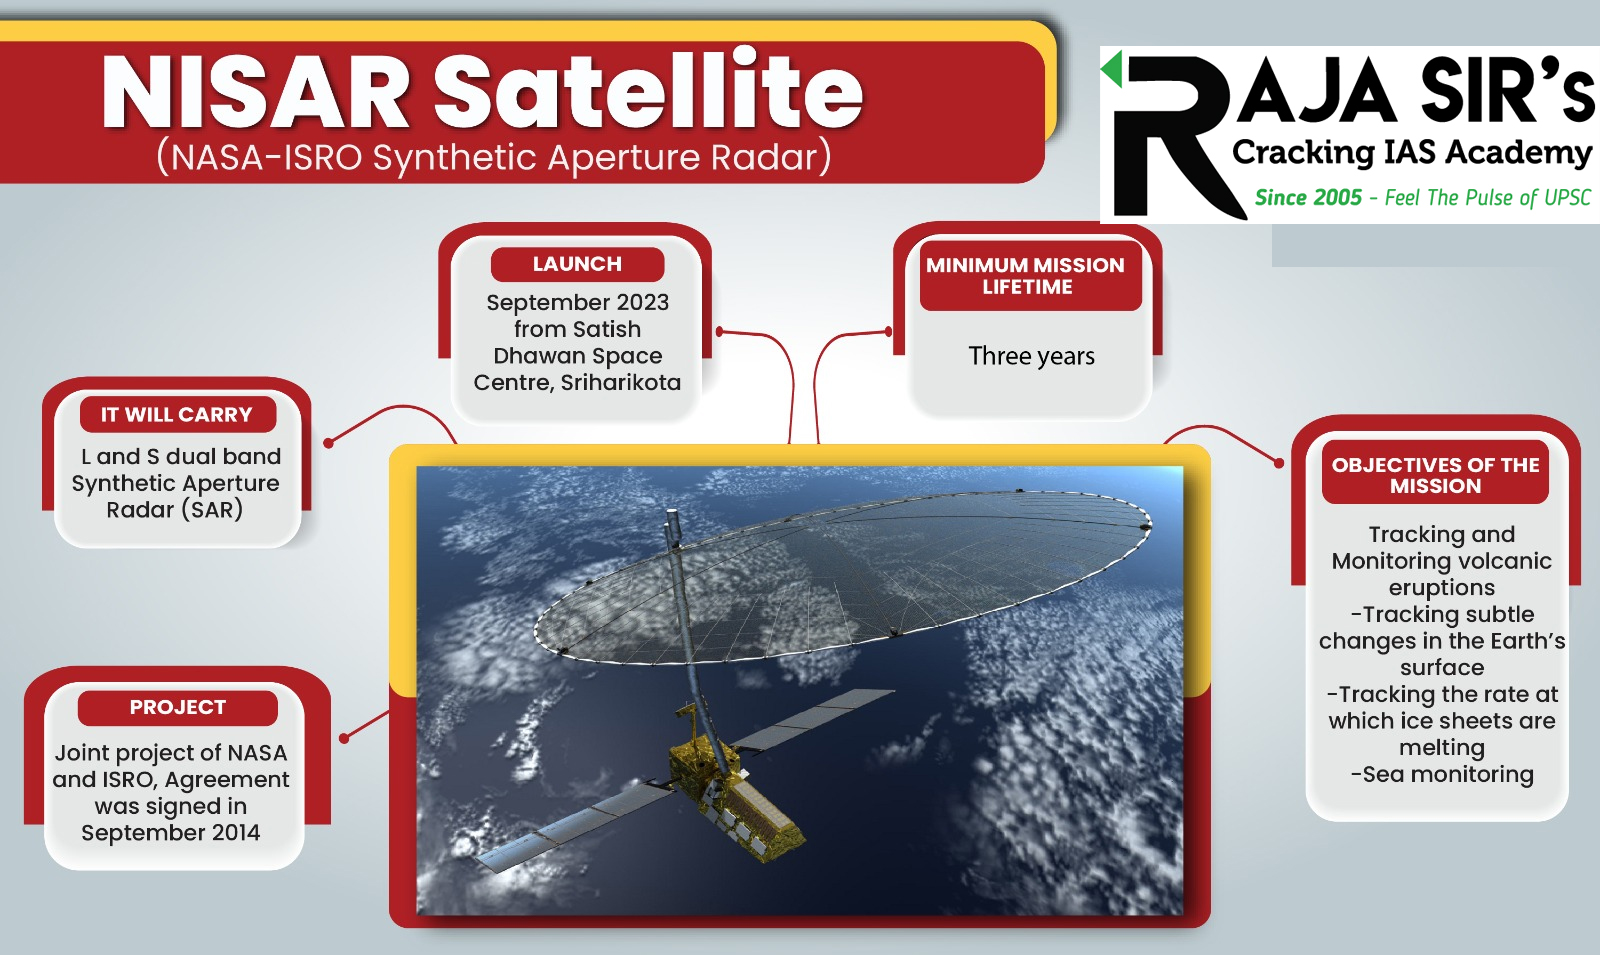 NISARhas been built by space agencies of the US and India under a partnership agreement signed in 2014. The 2,800 kilograms satellite consists of both L-band and S-band synthetic aperture radar (SAR) instruments, which makes it a dual-frequency imaging radar satellite.